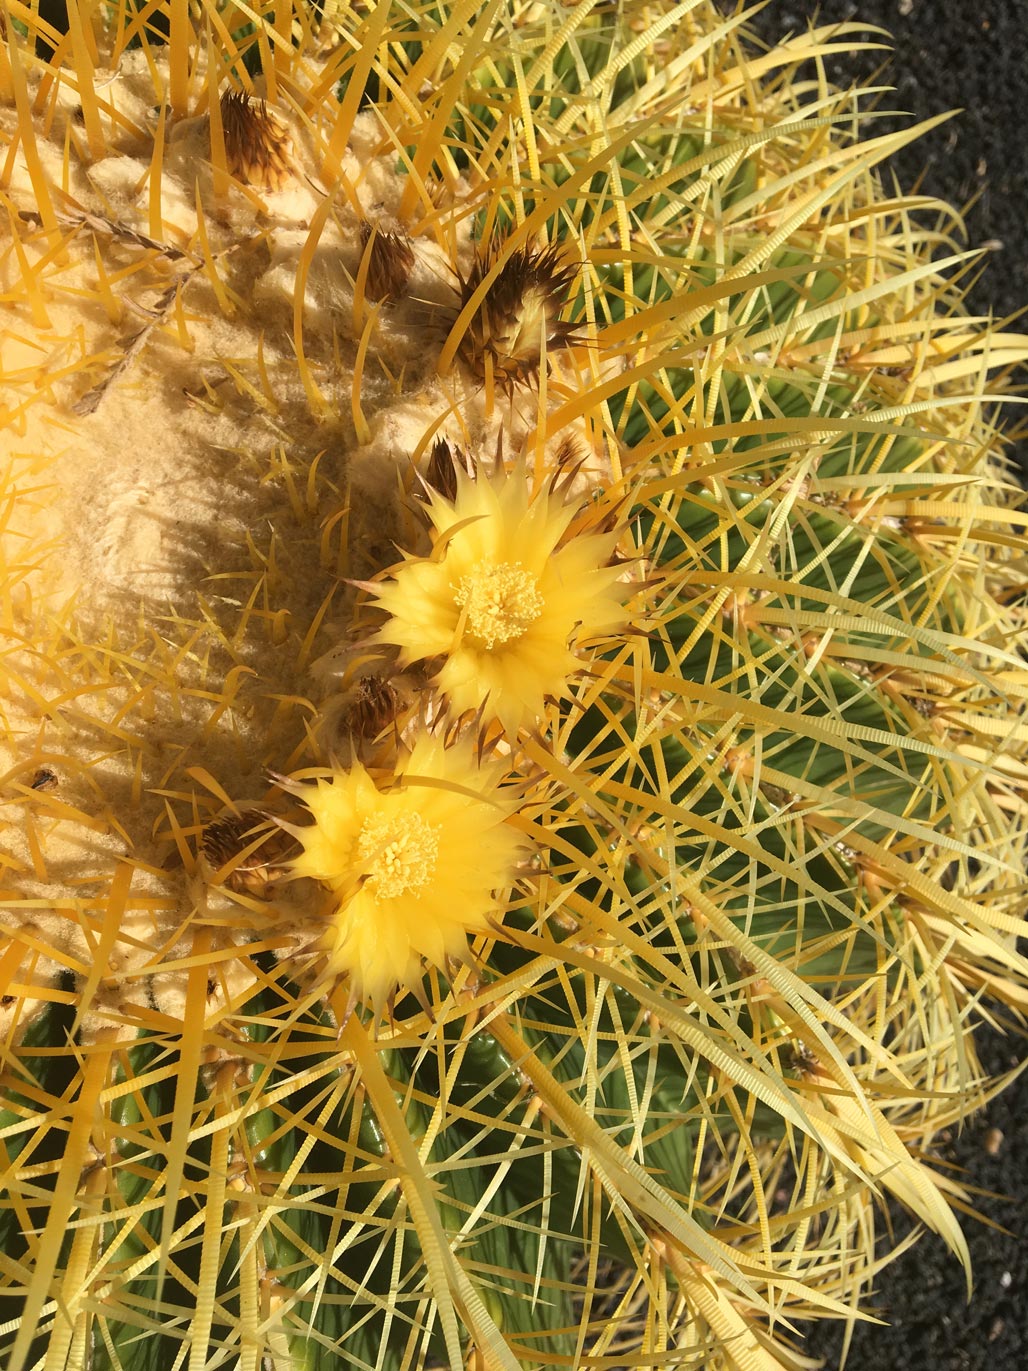 A top-down view of the Golden Barrel with yellow spines and a yellow flower.